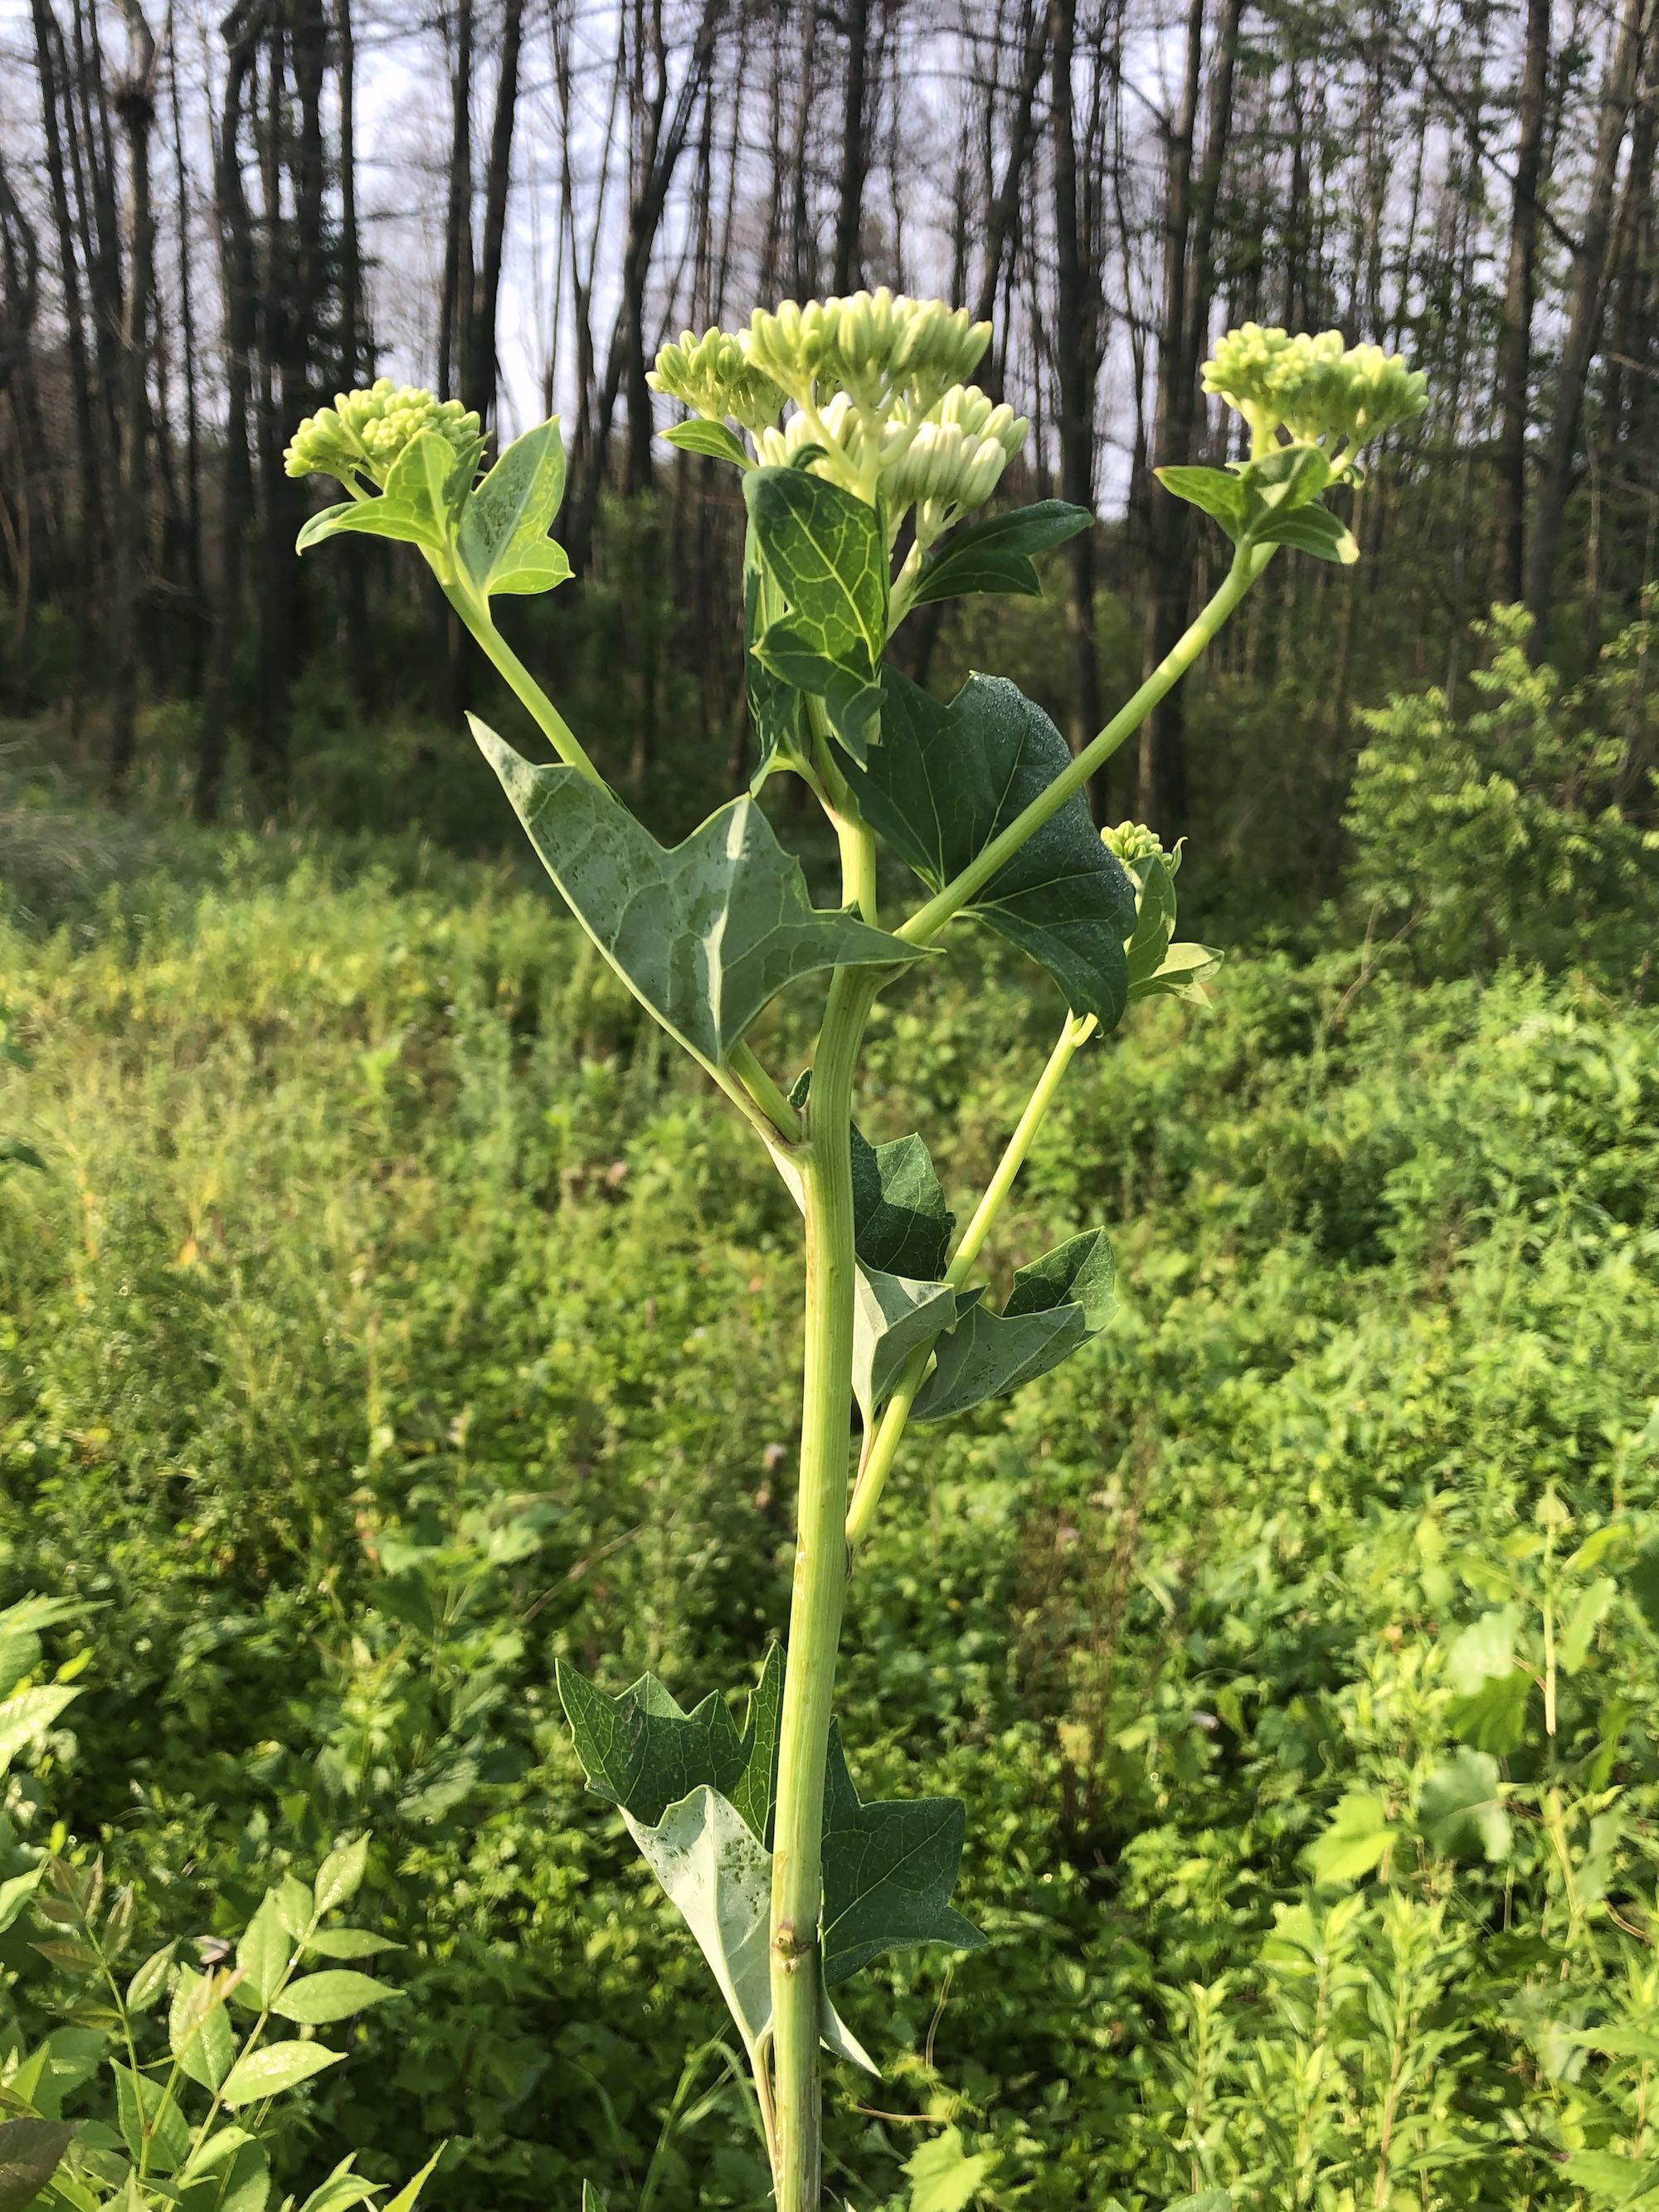 Pale Indian Plantain in Marion Dunn Prairie in Madison, Wisconsin on July 9, 2020.